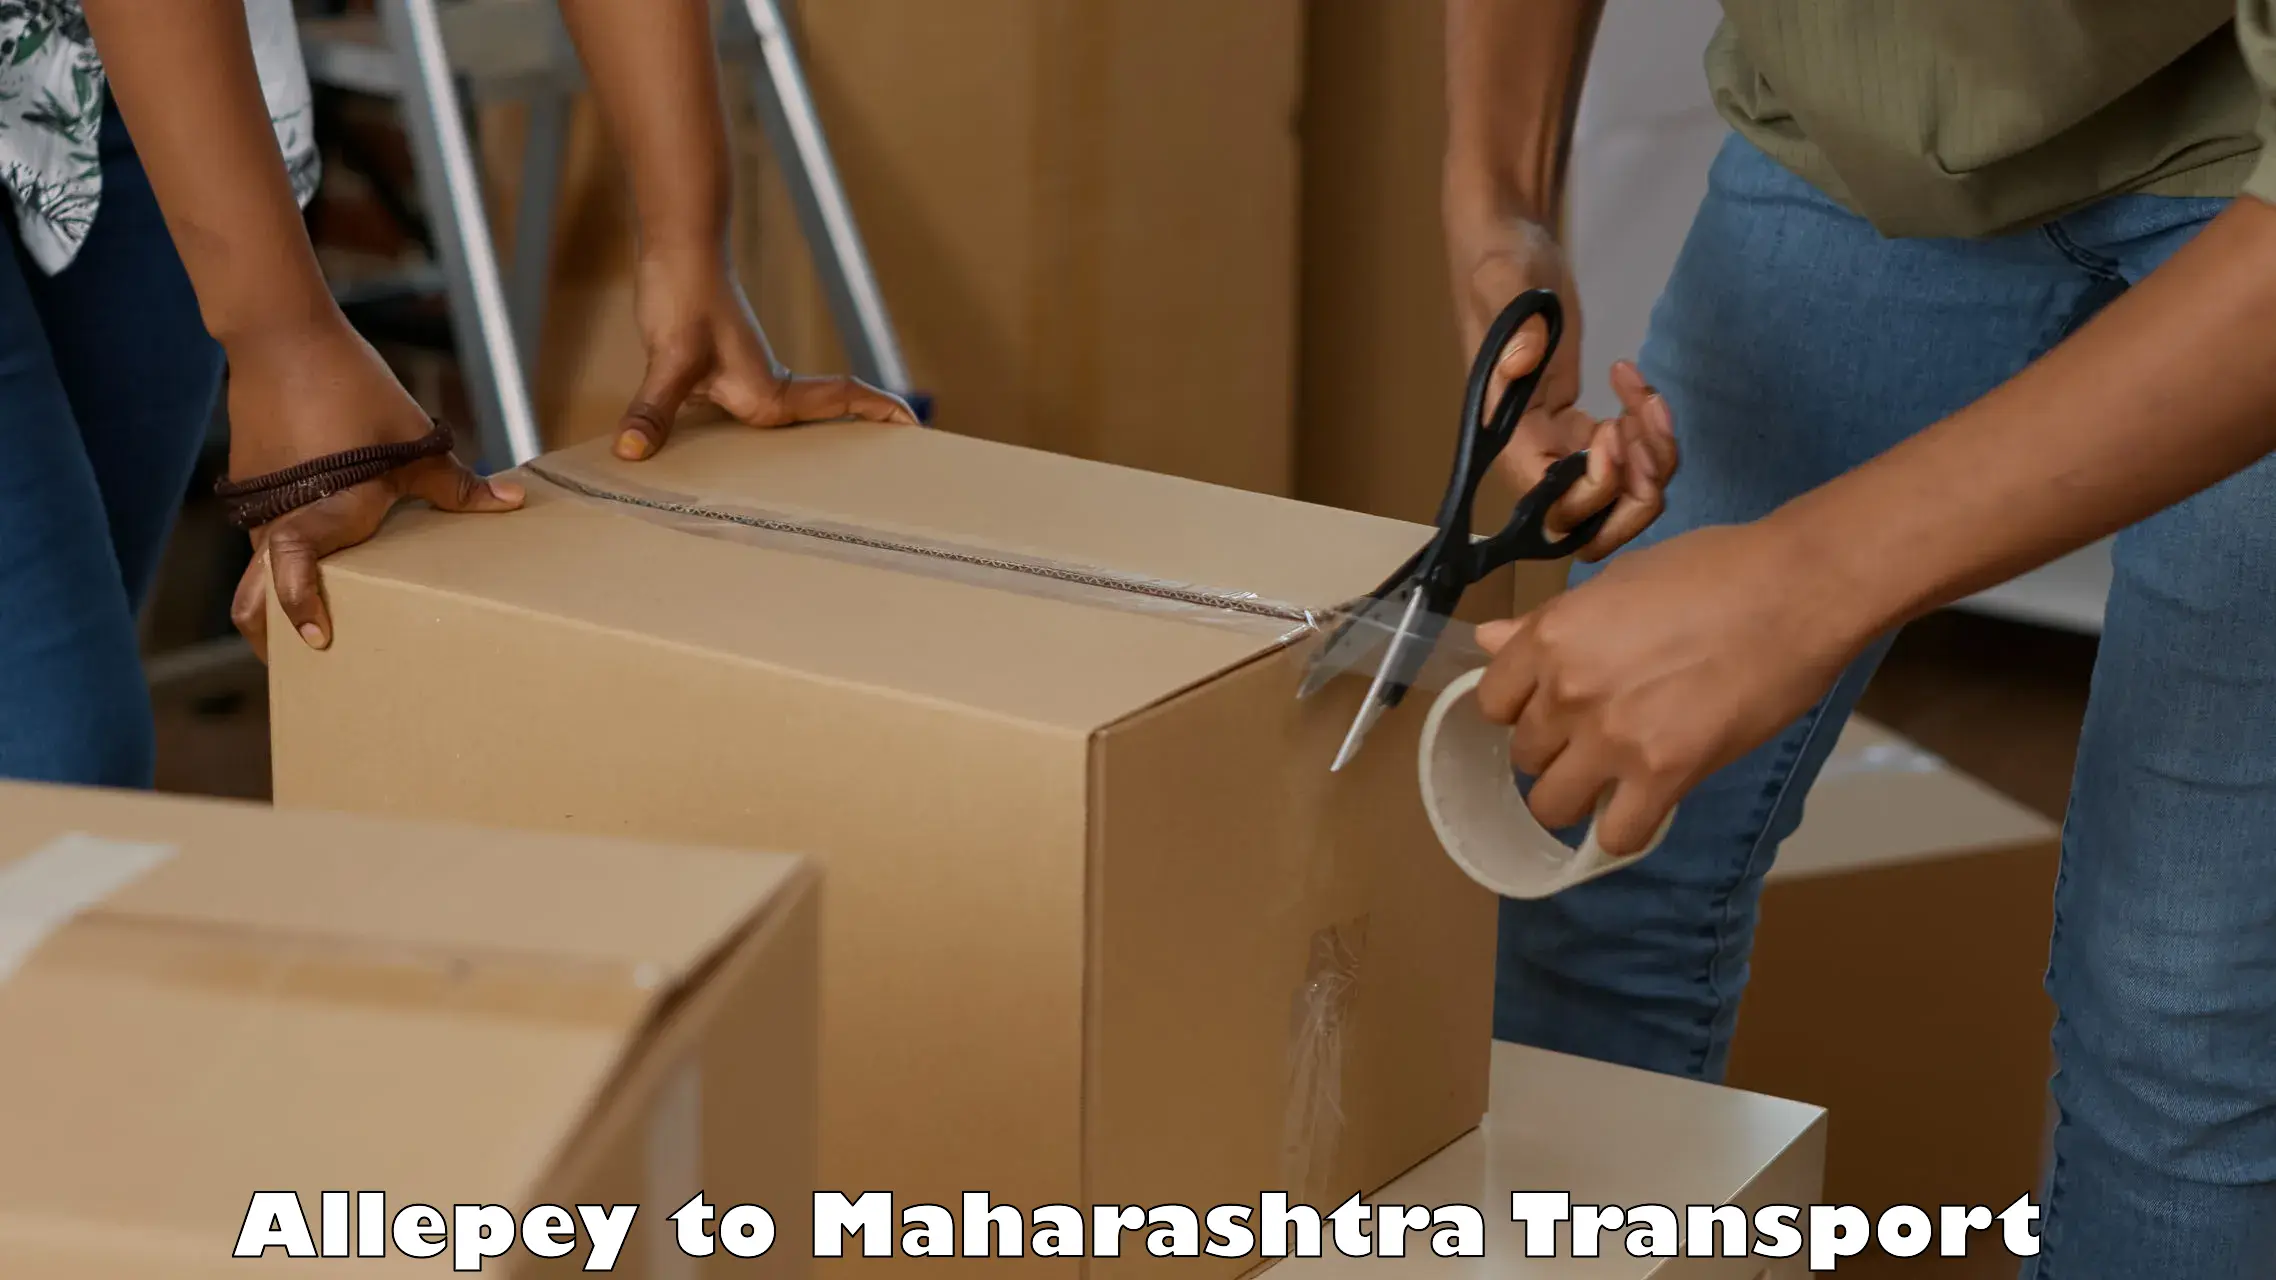 Truck transport companies in India Allepey to Talegaon Dabhade